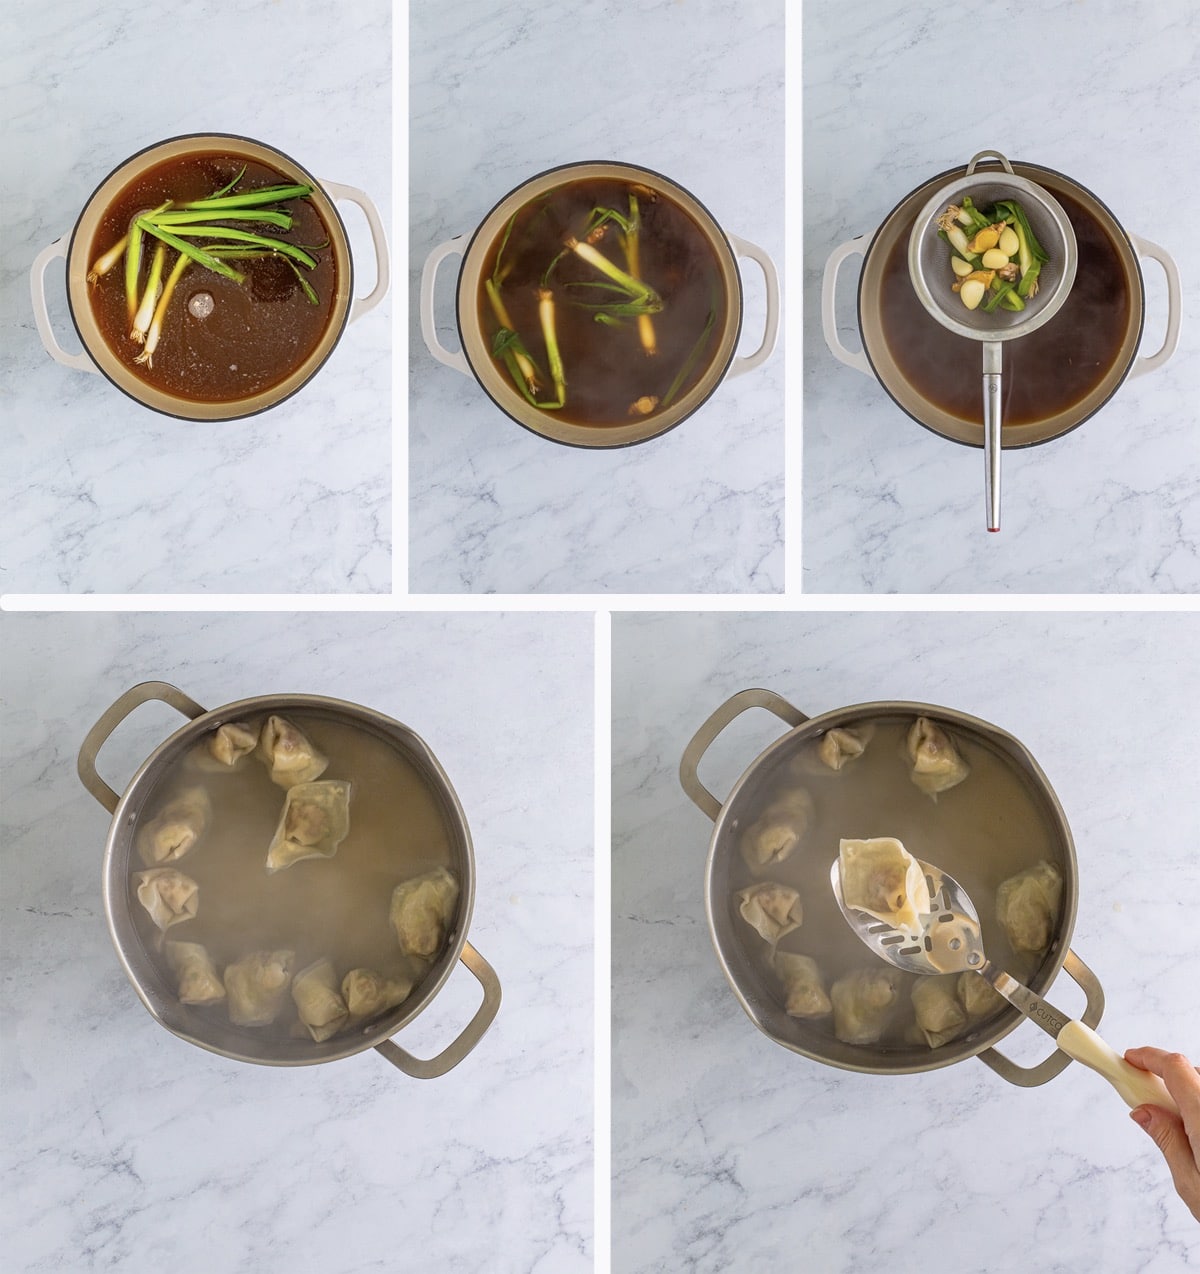 Collage of photos showing how to make the broth and how to boil the wontons for Wonton Soup Recipe on gray marble table top